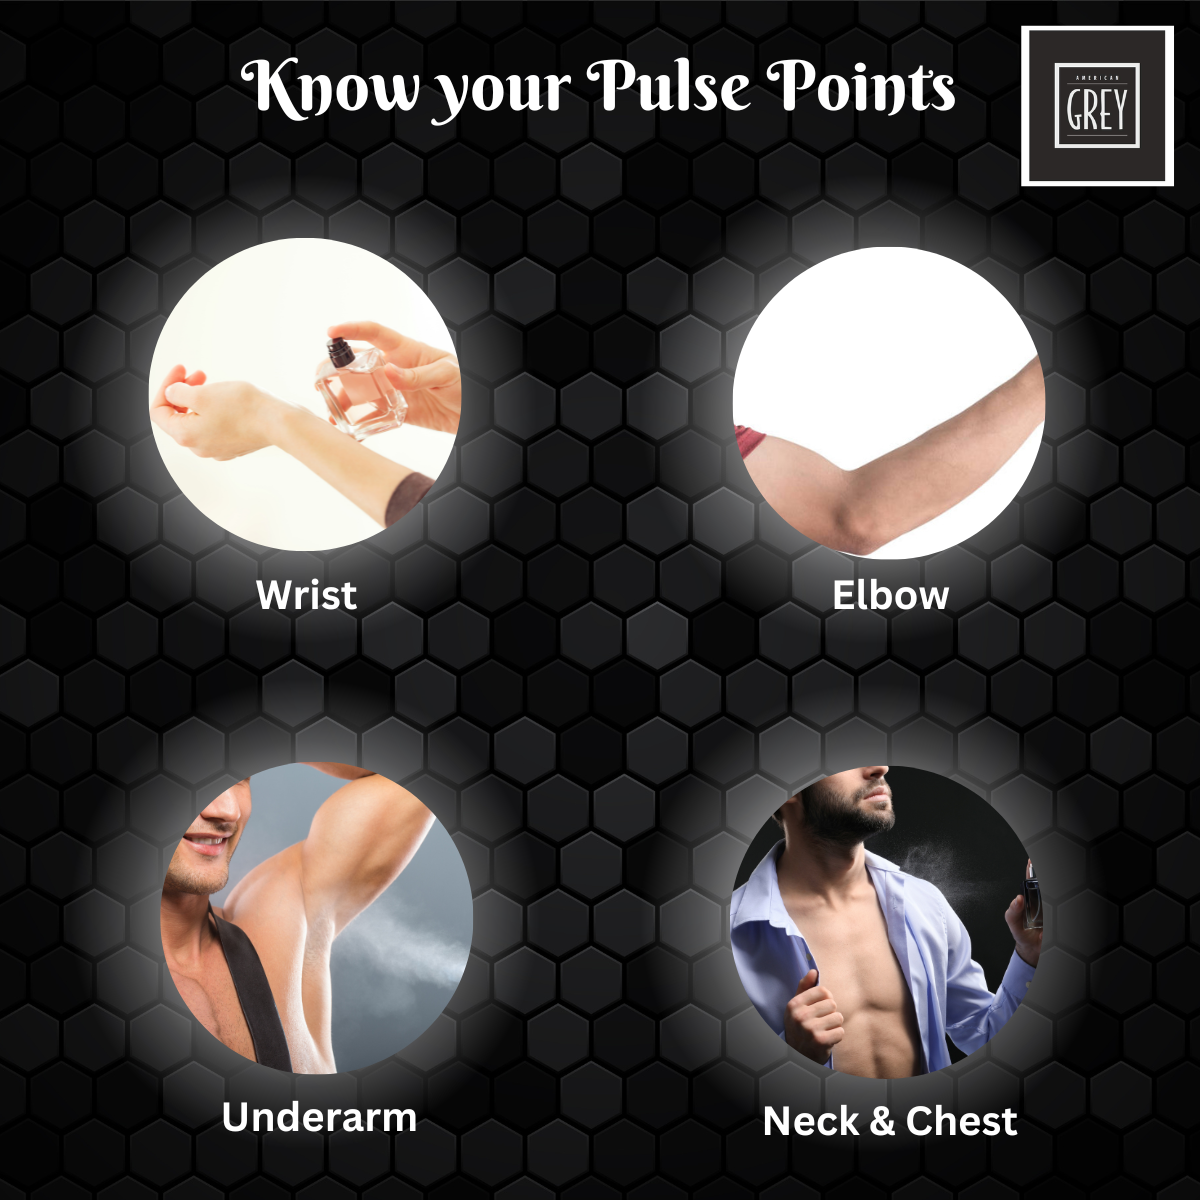 know your pulse points, pulse points, american grey turkish cafe deo, deo spray for him, what are the pulse points to apply deodorant for men, men deodorant, deodorant spray for men, what are the pulse points for perfume male?, what is the best way to apply perfume for men?,where are male pulse points, deodorant tips for men, deodorant tips for male in india, deo pulse points myths, best pulse points for deo male